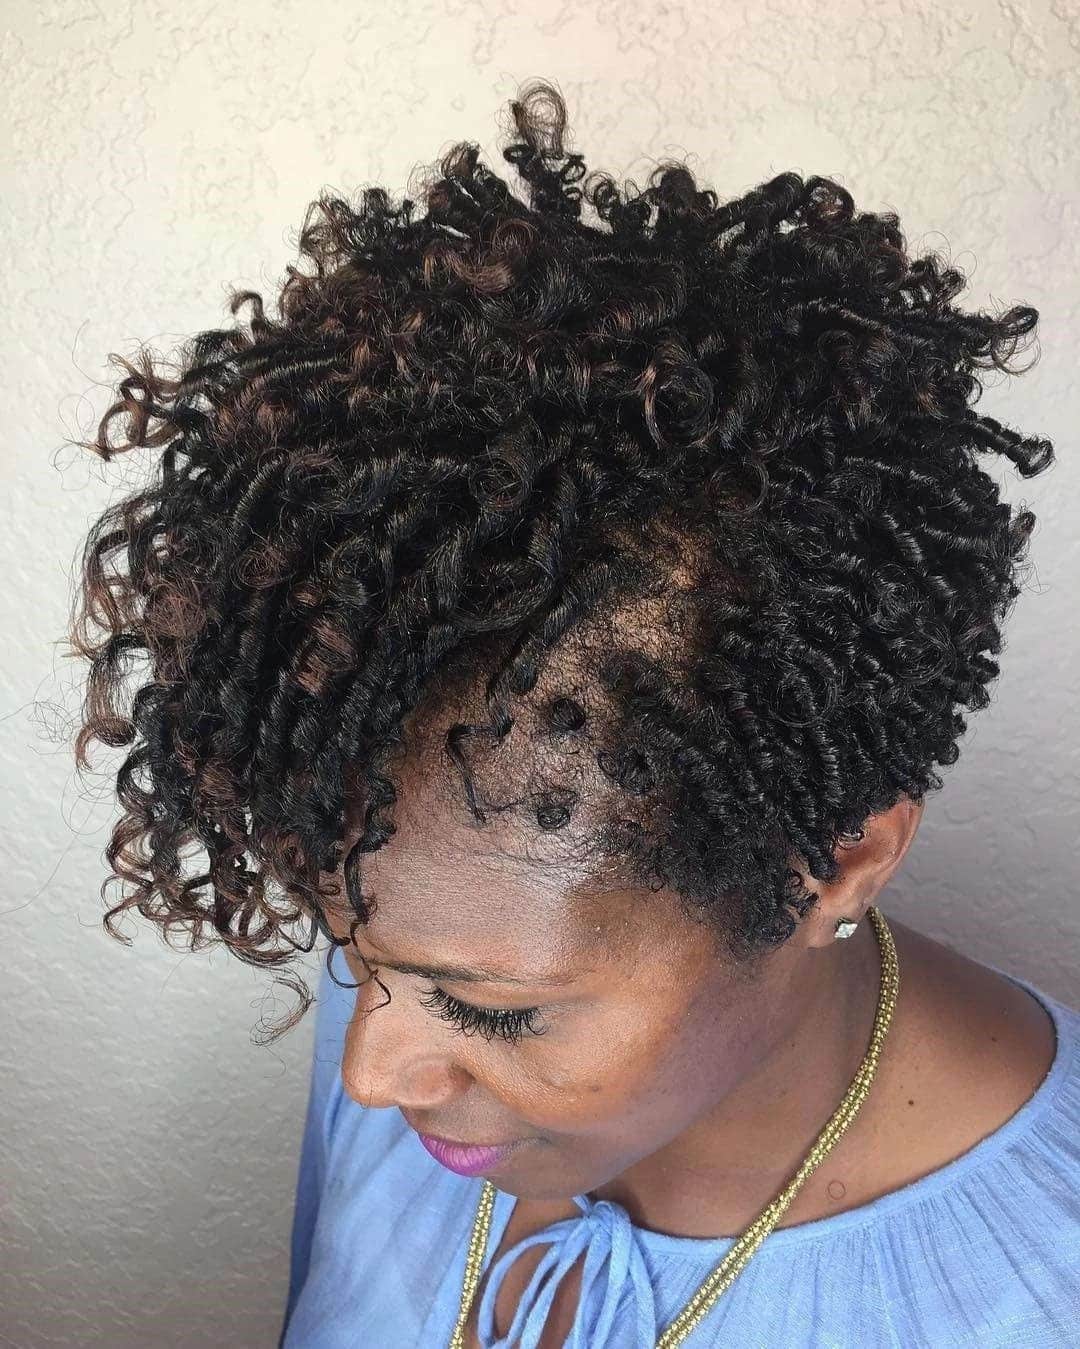 65 Easy Natural Hairstyles For Teenage Black Girls in 2023 - Coils and Glory